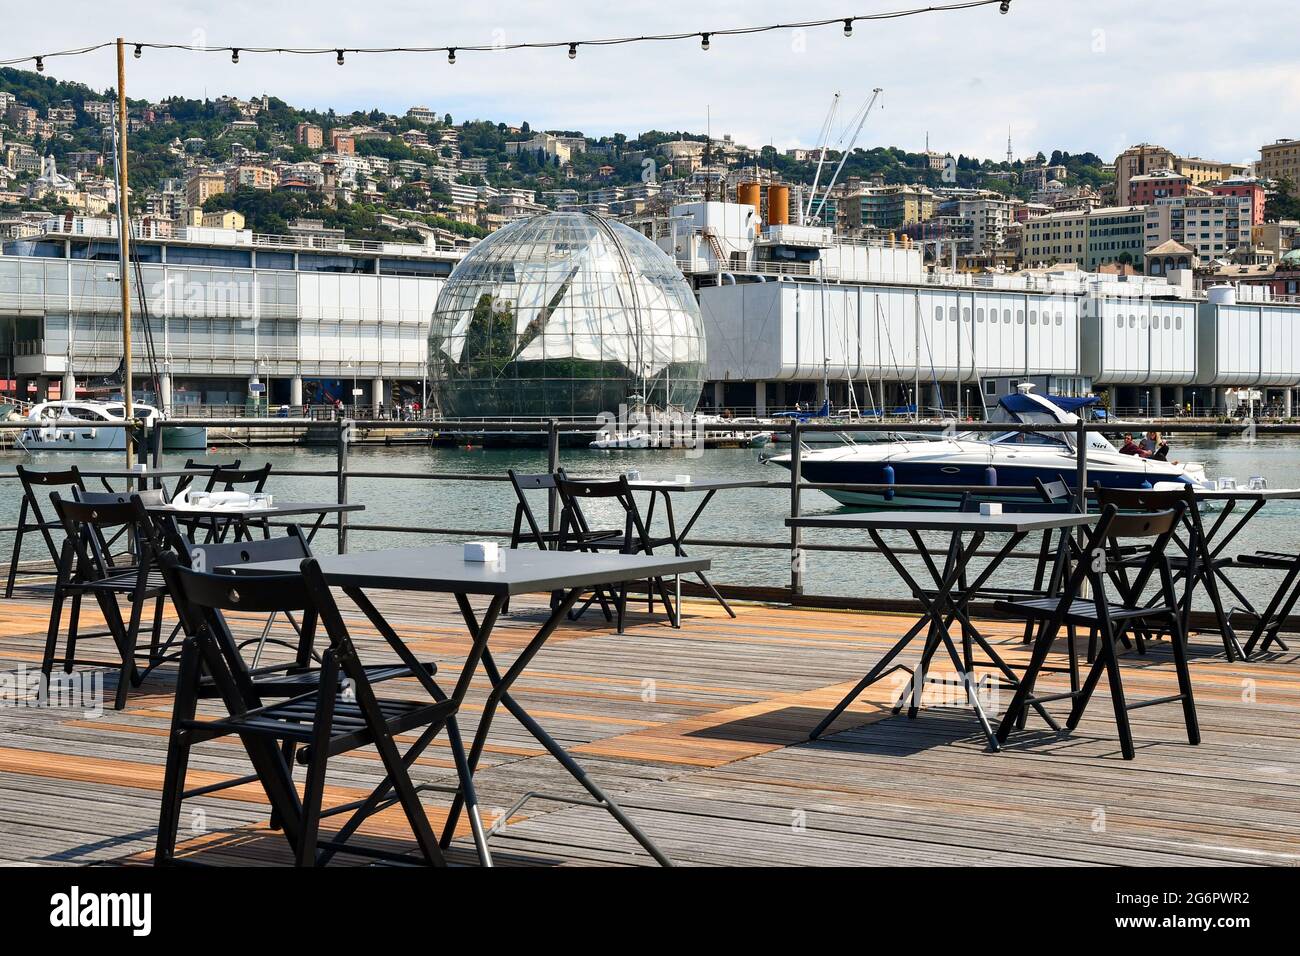 An empty outdoor restaurant on the waterside of the Old Port with the Biosphere and the Aquarium in the background, Genoa, Liguria, Italy Stock Photo